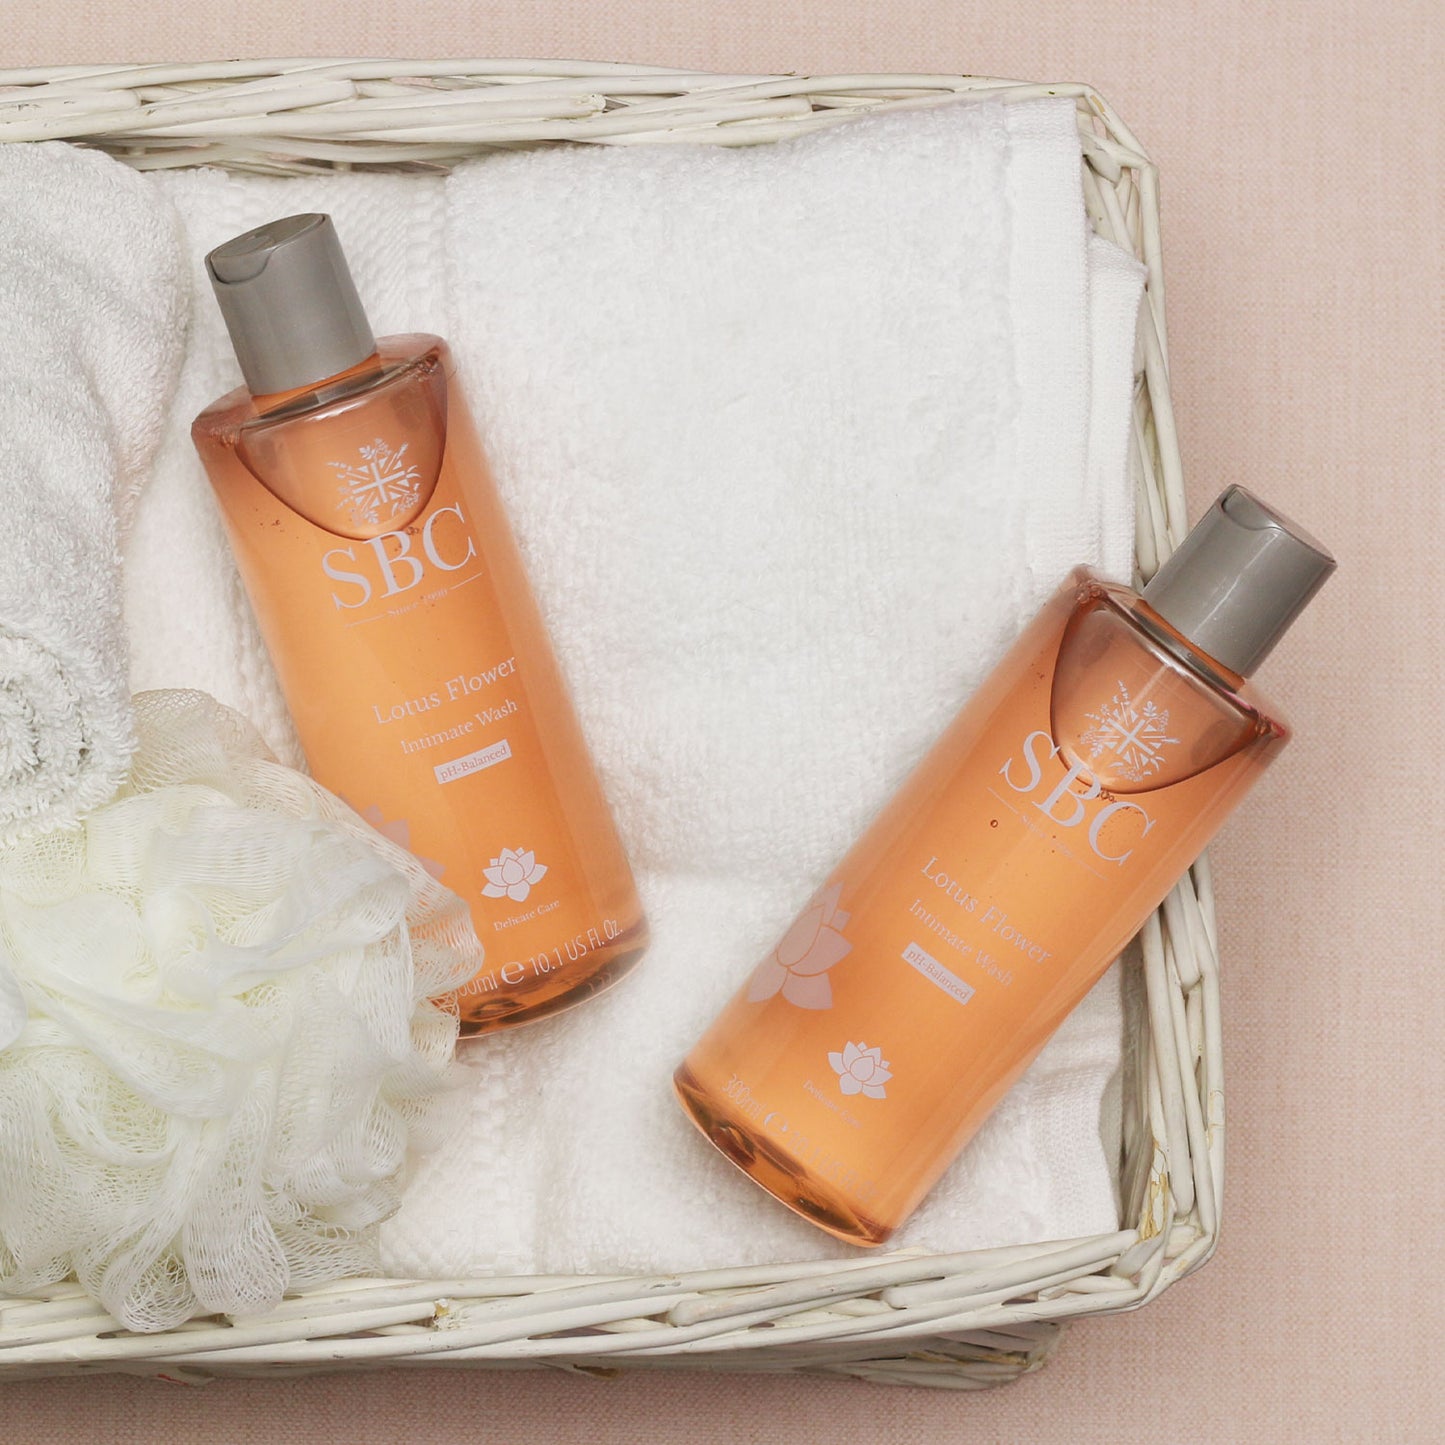 SBC Skincare's Lotus Flower Intimate Washes in a white basket with a towel 